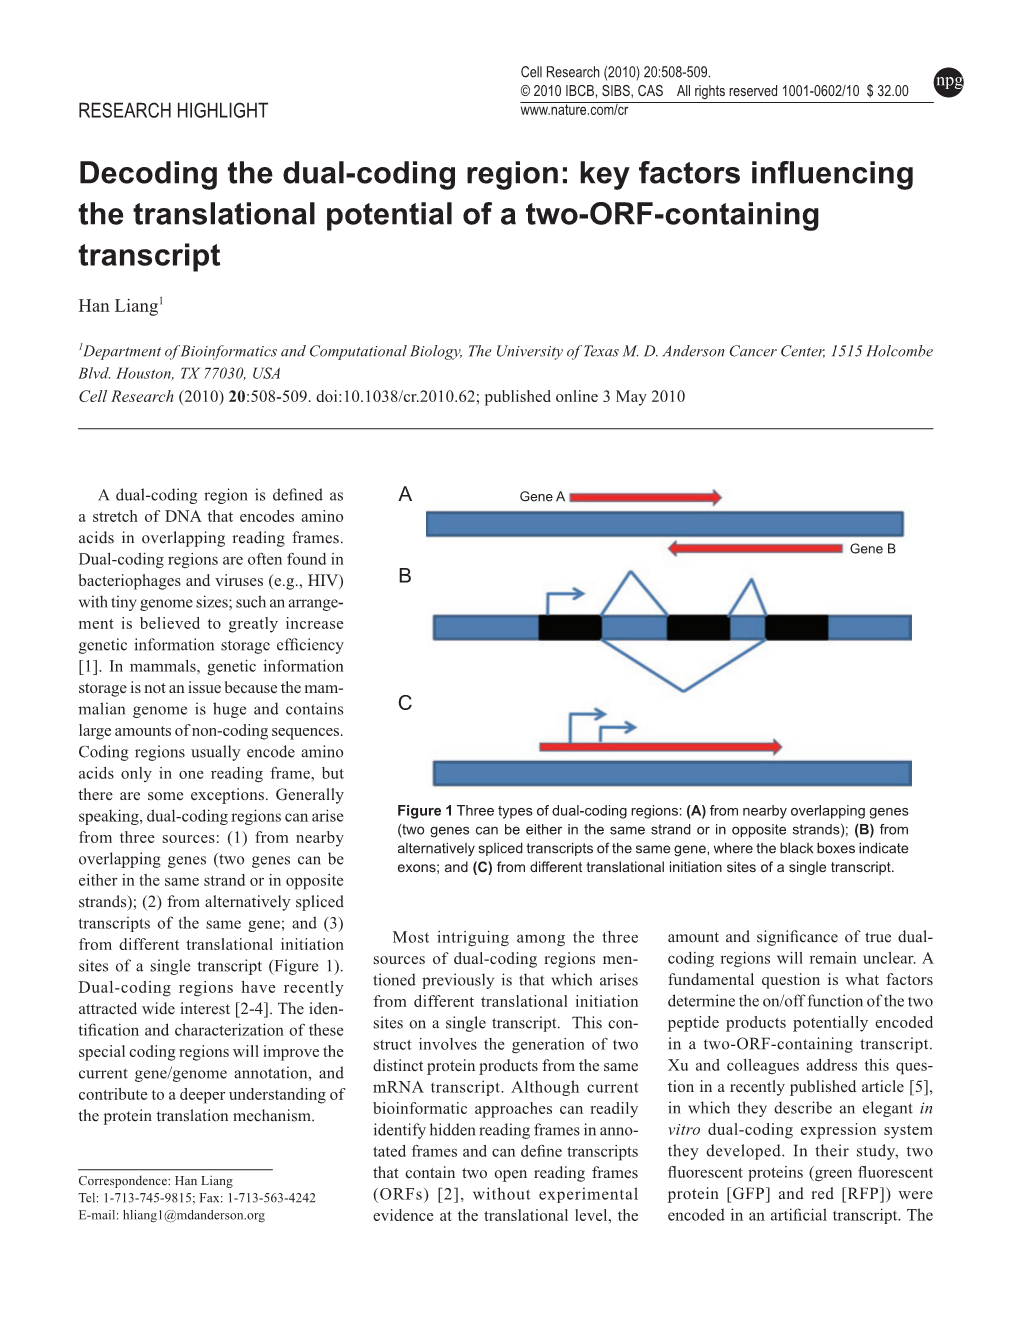 Decoding the Dual-Coding Region: Key Factors Influencing the Translational Potential of a Two-ORF-Containing Transcript